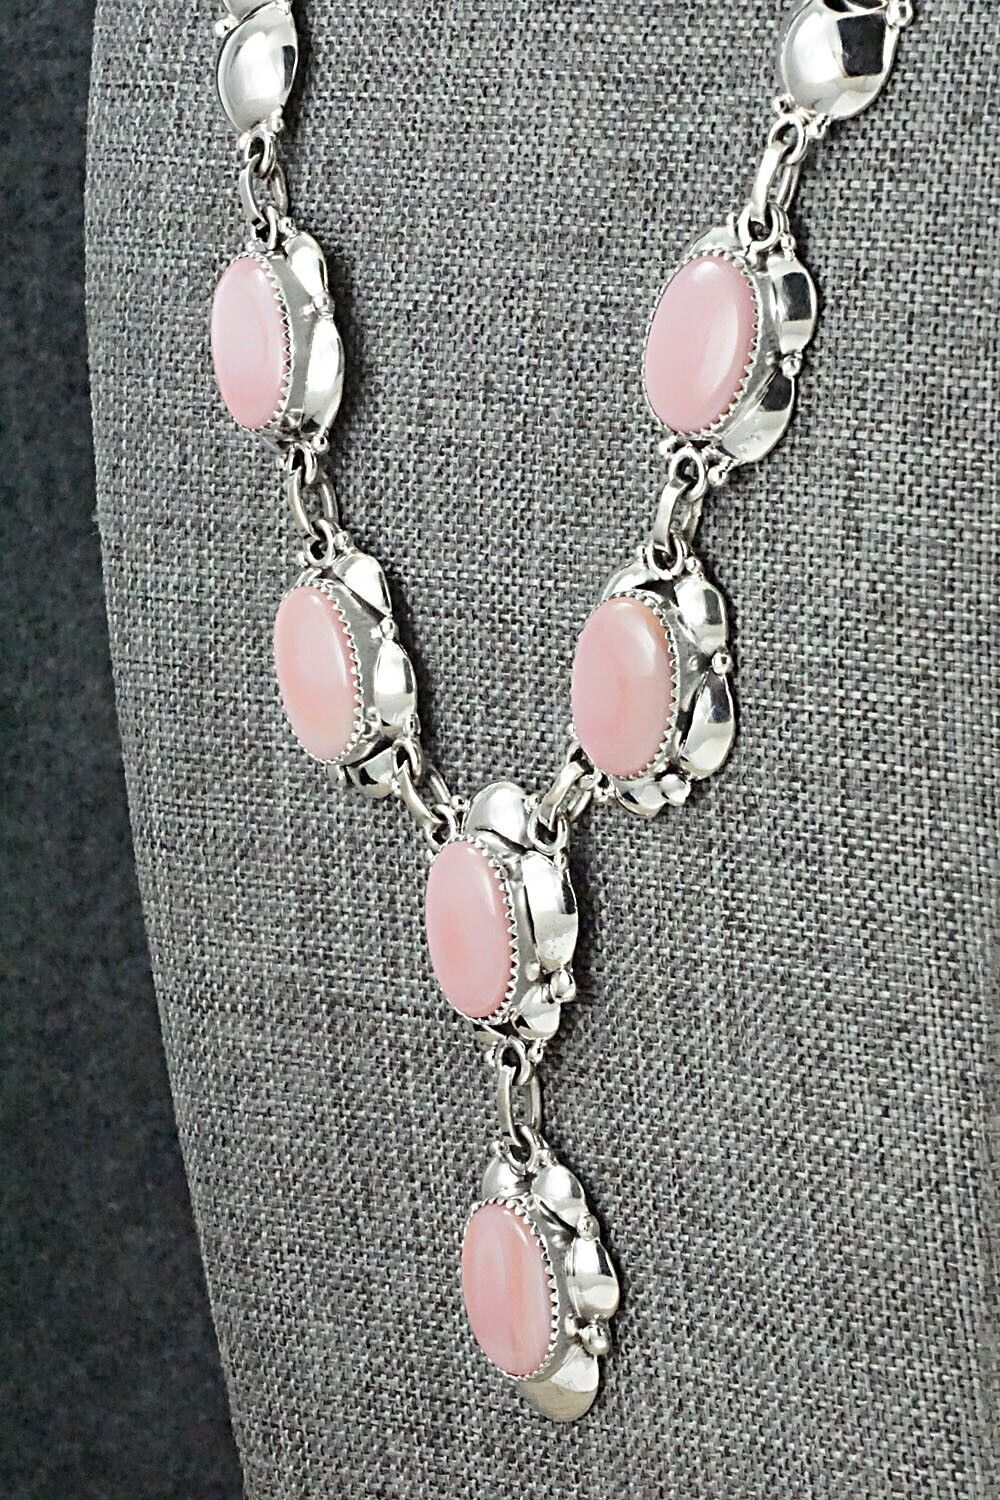 Pink Conch Shell & Sterling Silver Necklace Set - Clem Nalwood